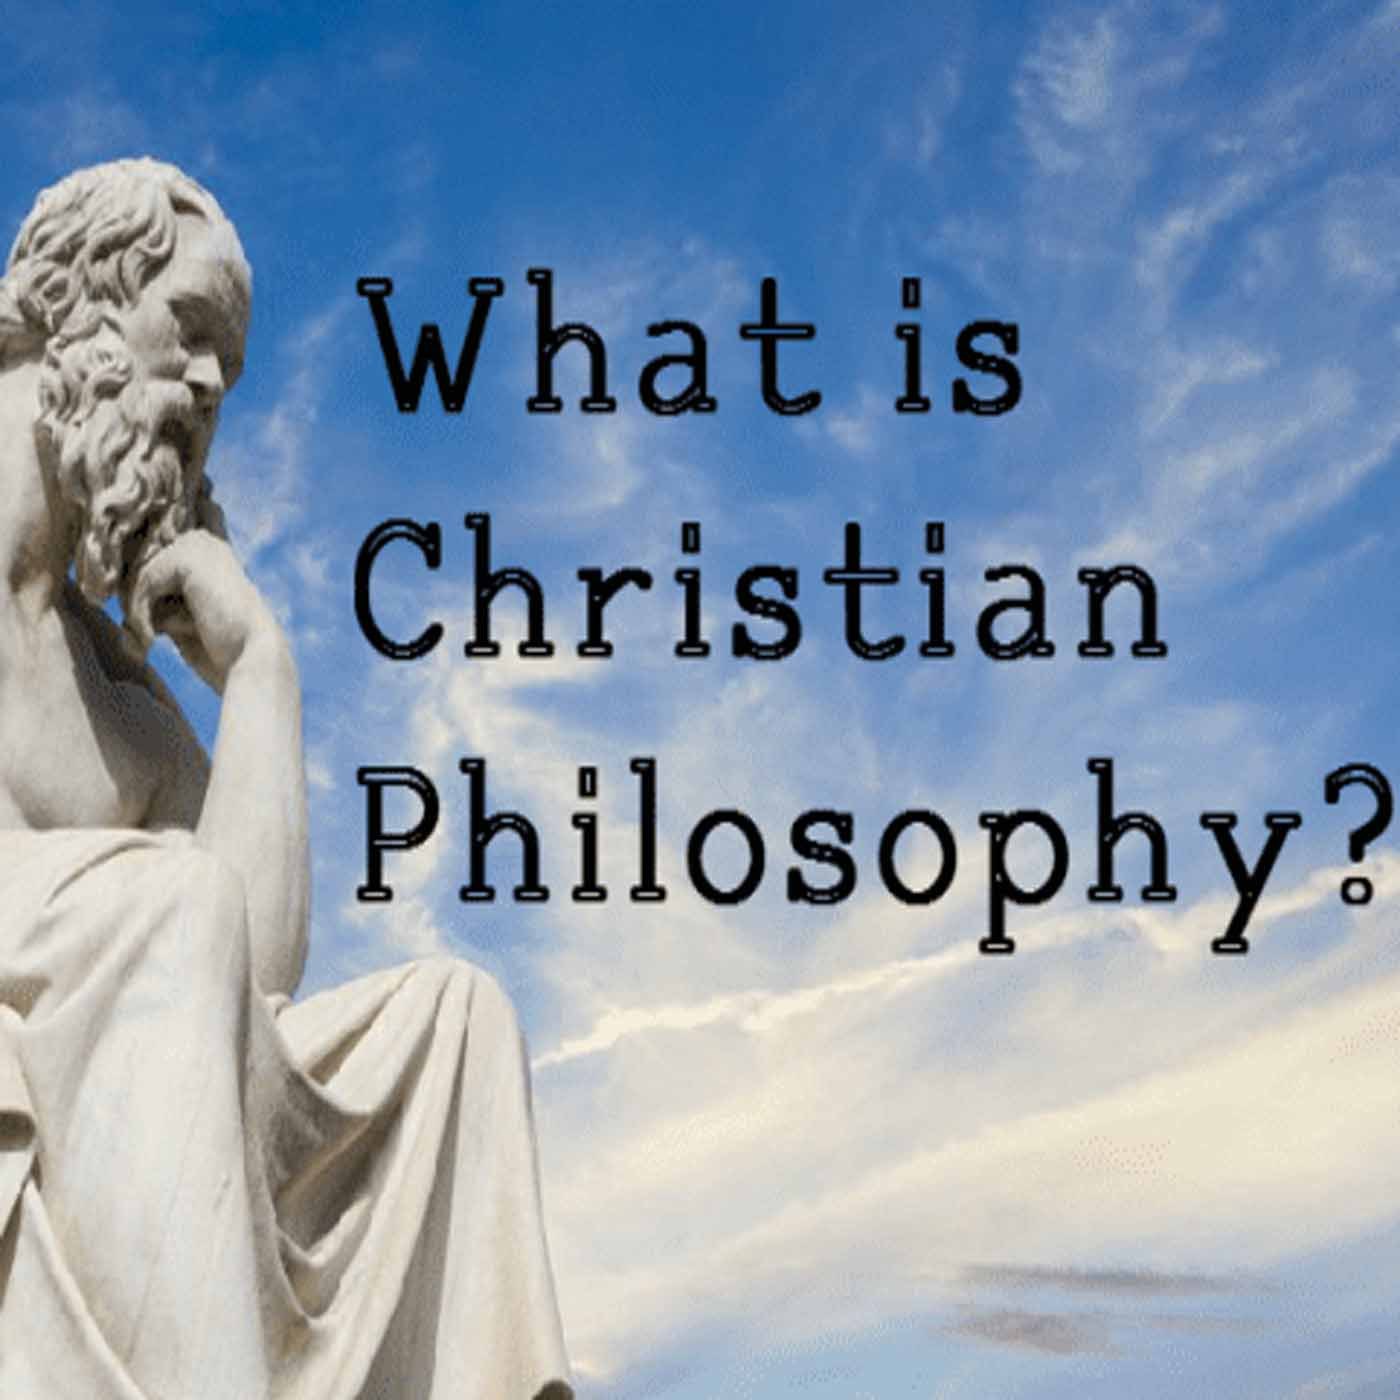 The Role of Philosophy Metaphysics and Epistemology in the Life of a Believer